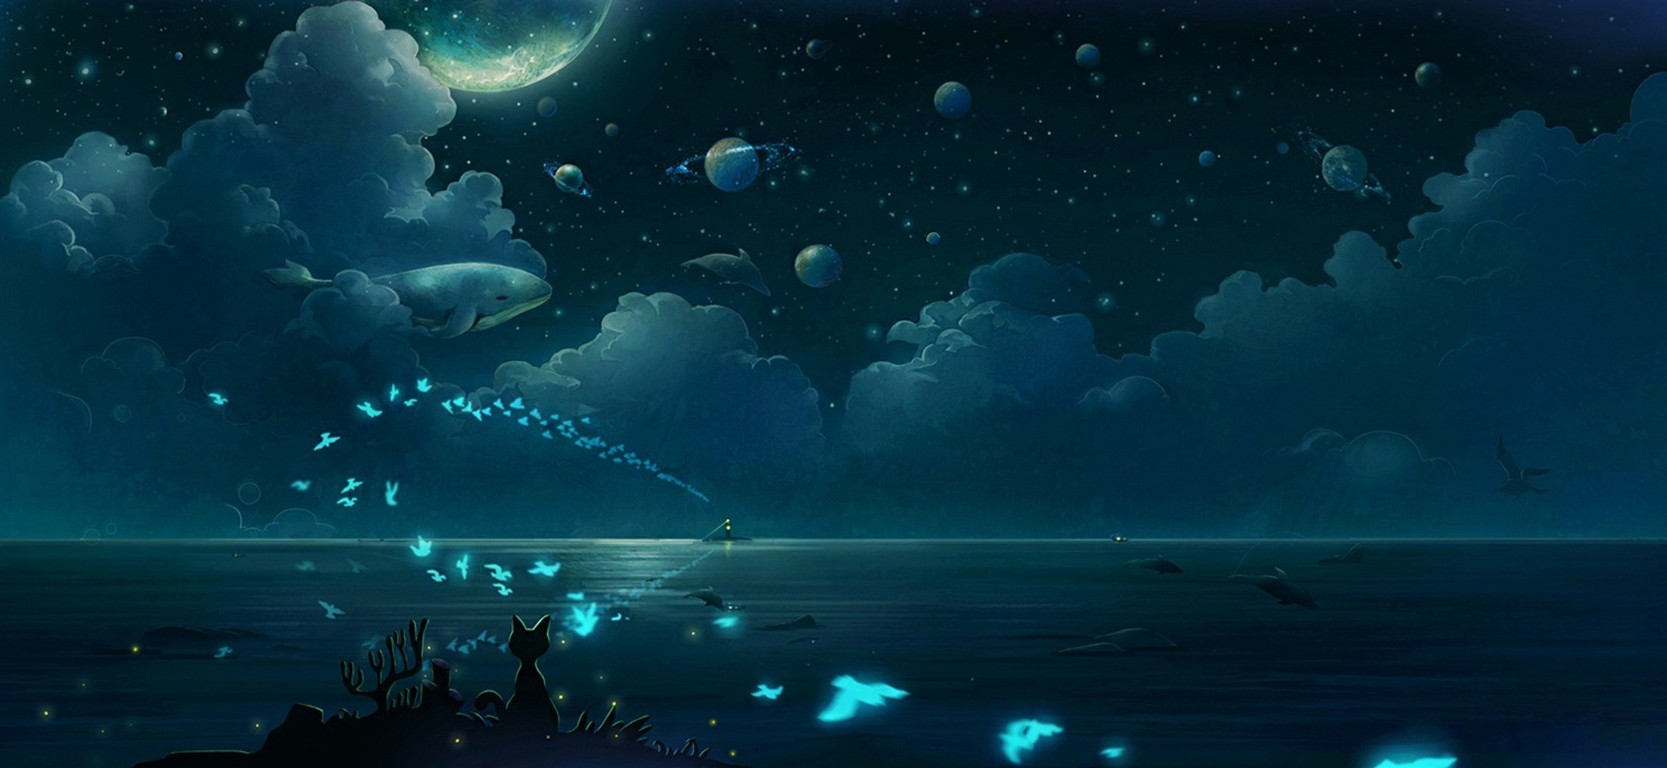 butterfly clouds night moonlight planet whale cat fish animals birds Wallpaper